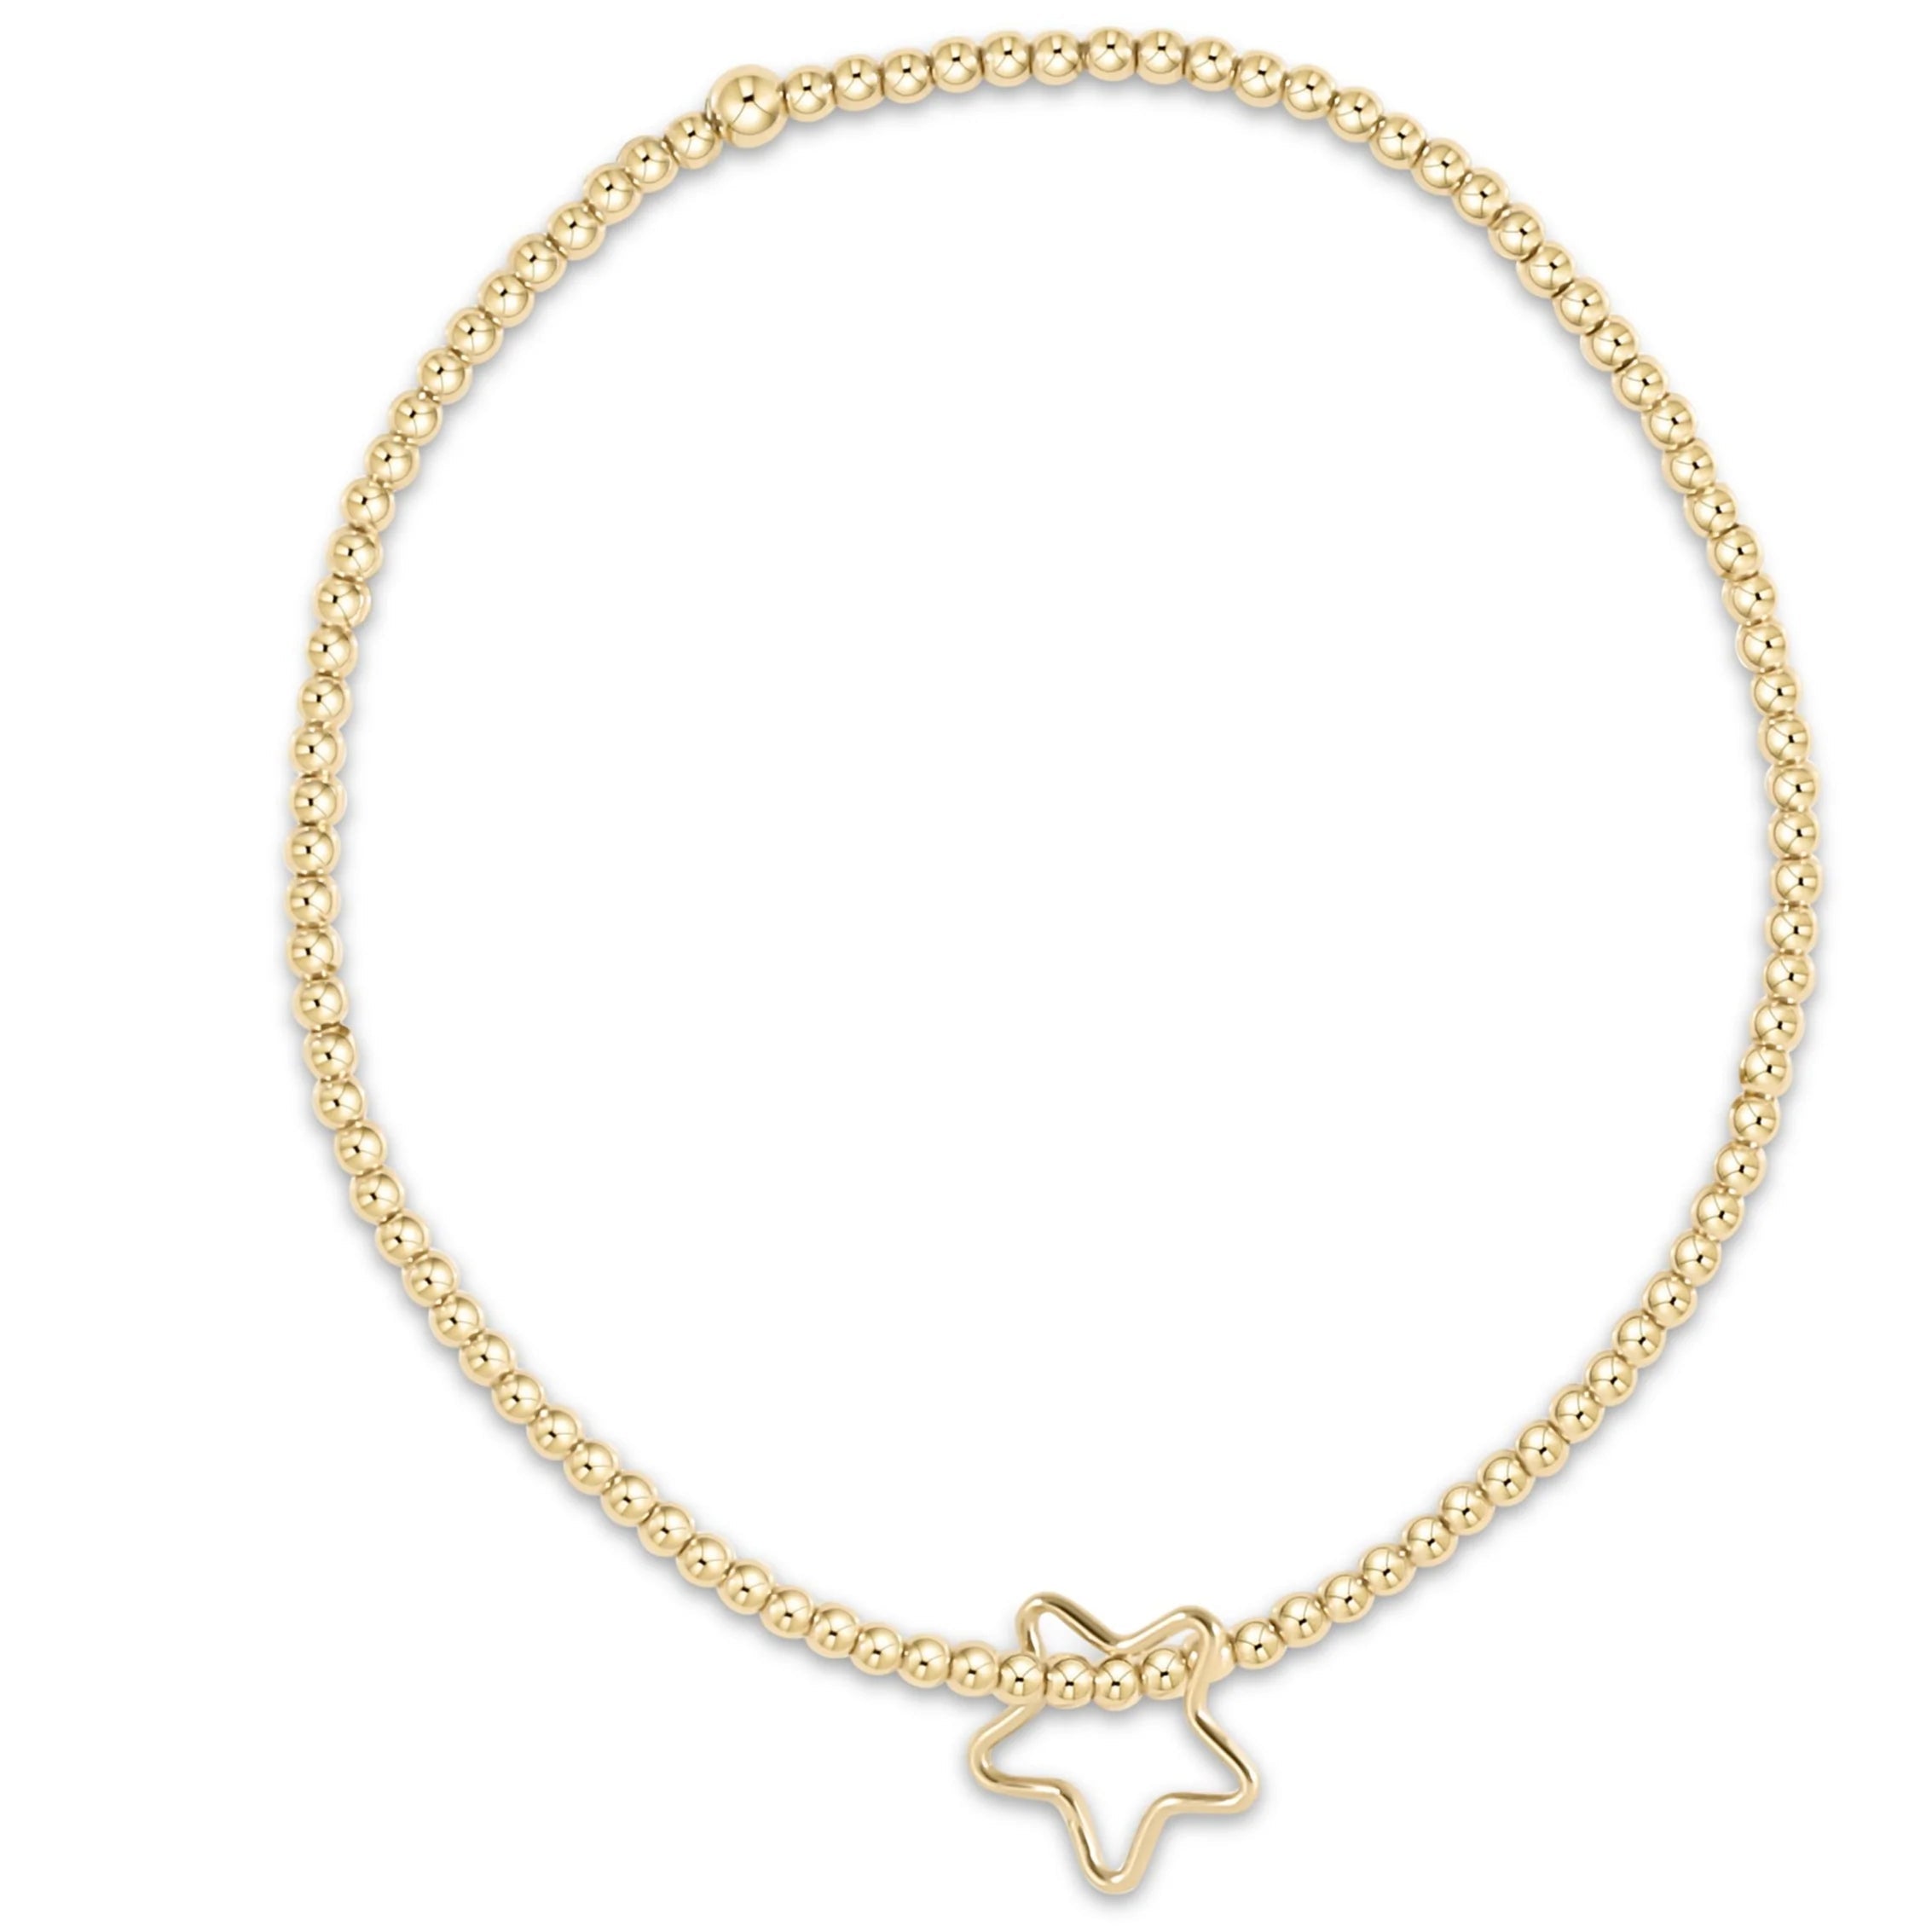 Classic Star Gold Charm Bracelet-Bracelets-The Lovely Closet-The Lovely Closet, Women's Fashion Boutique in Alexandria, KY